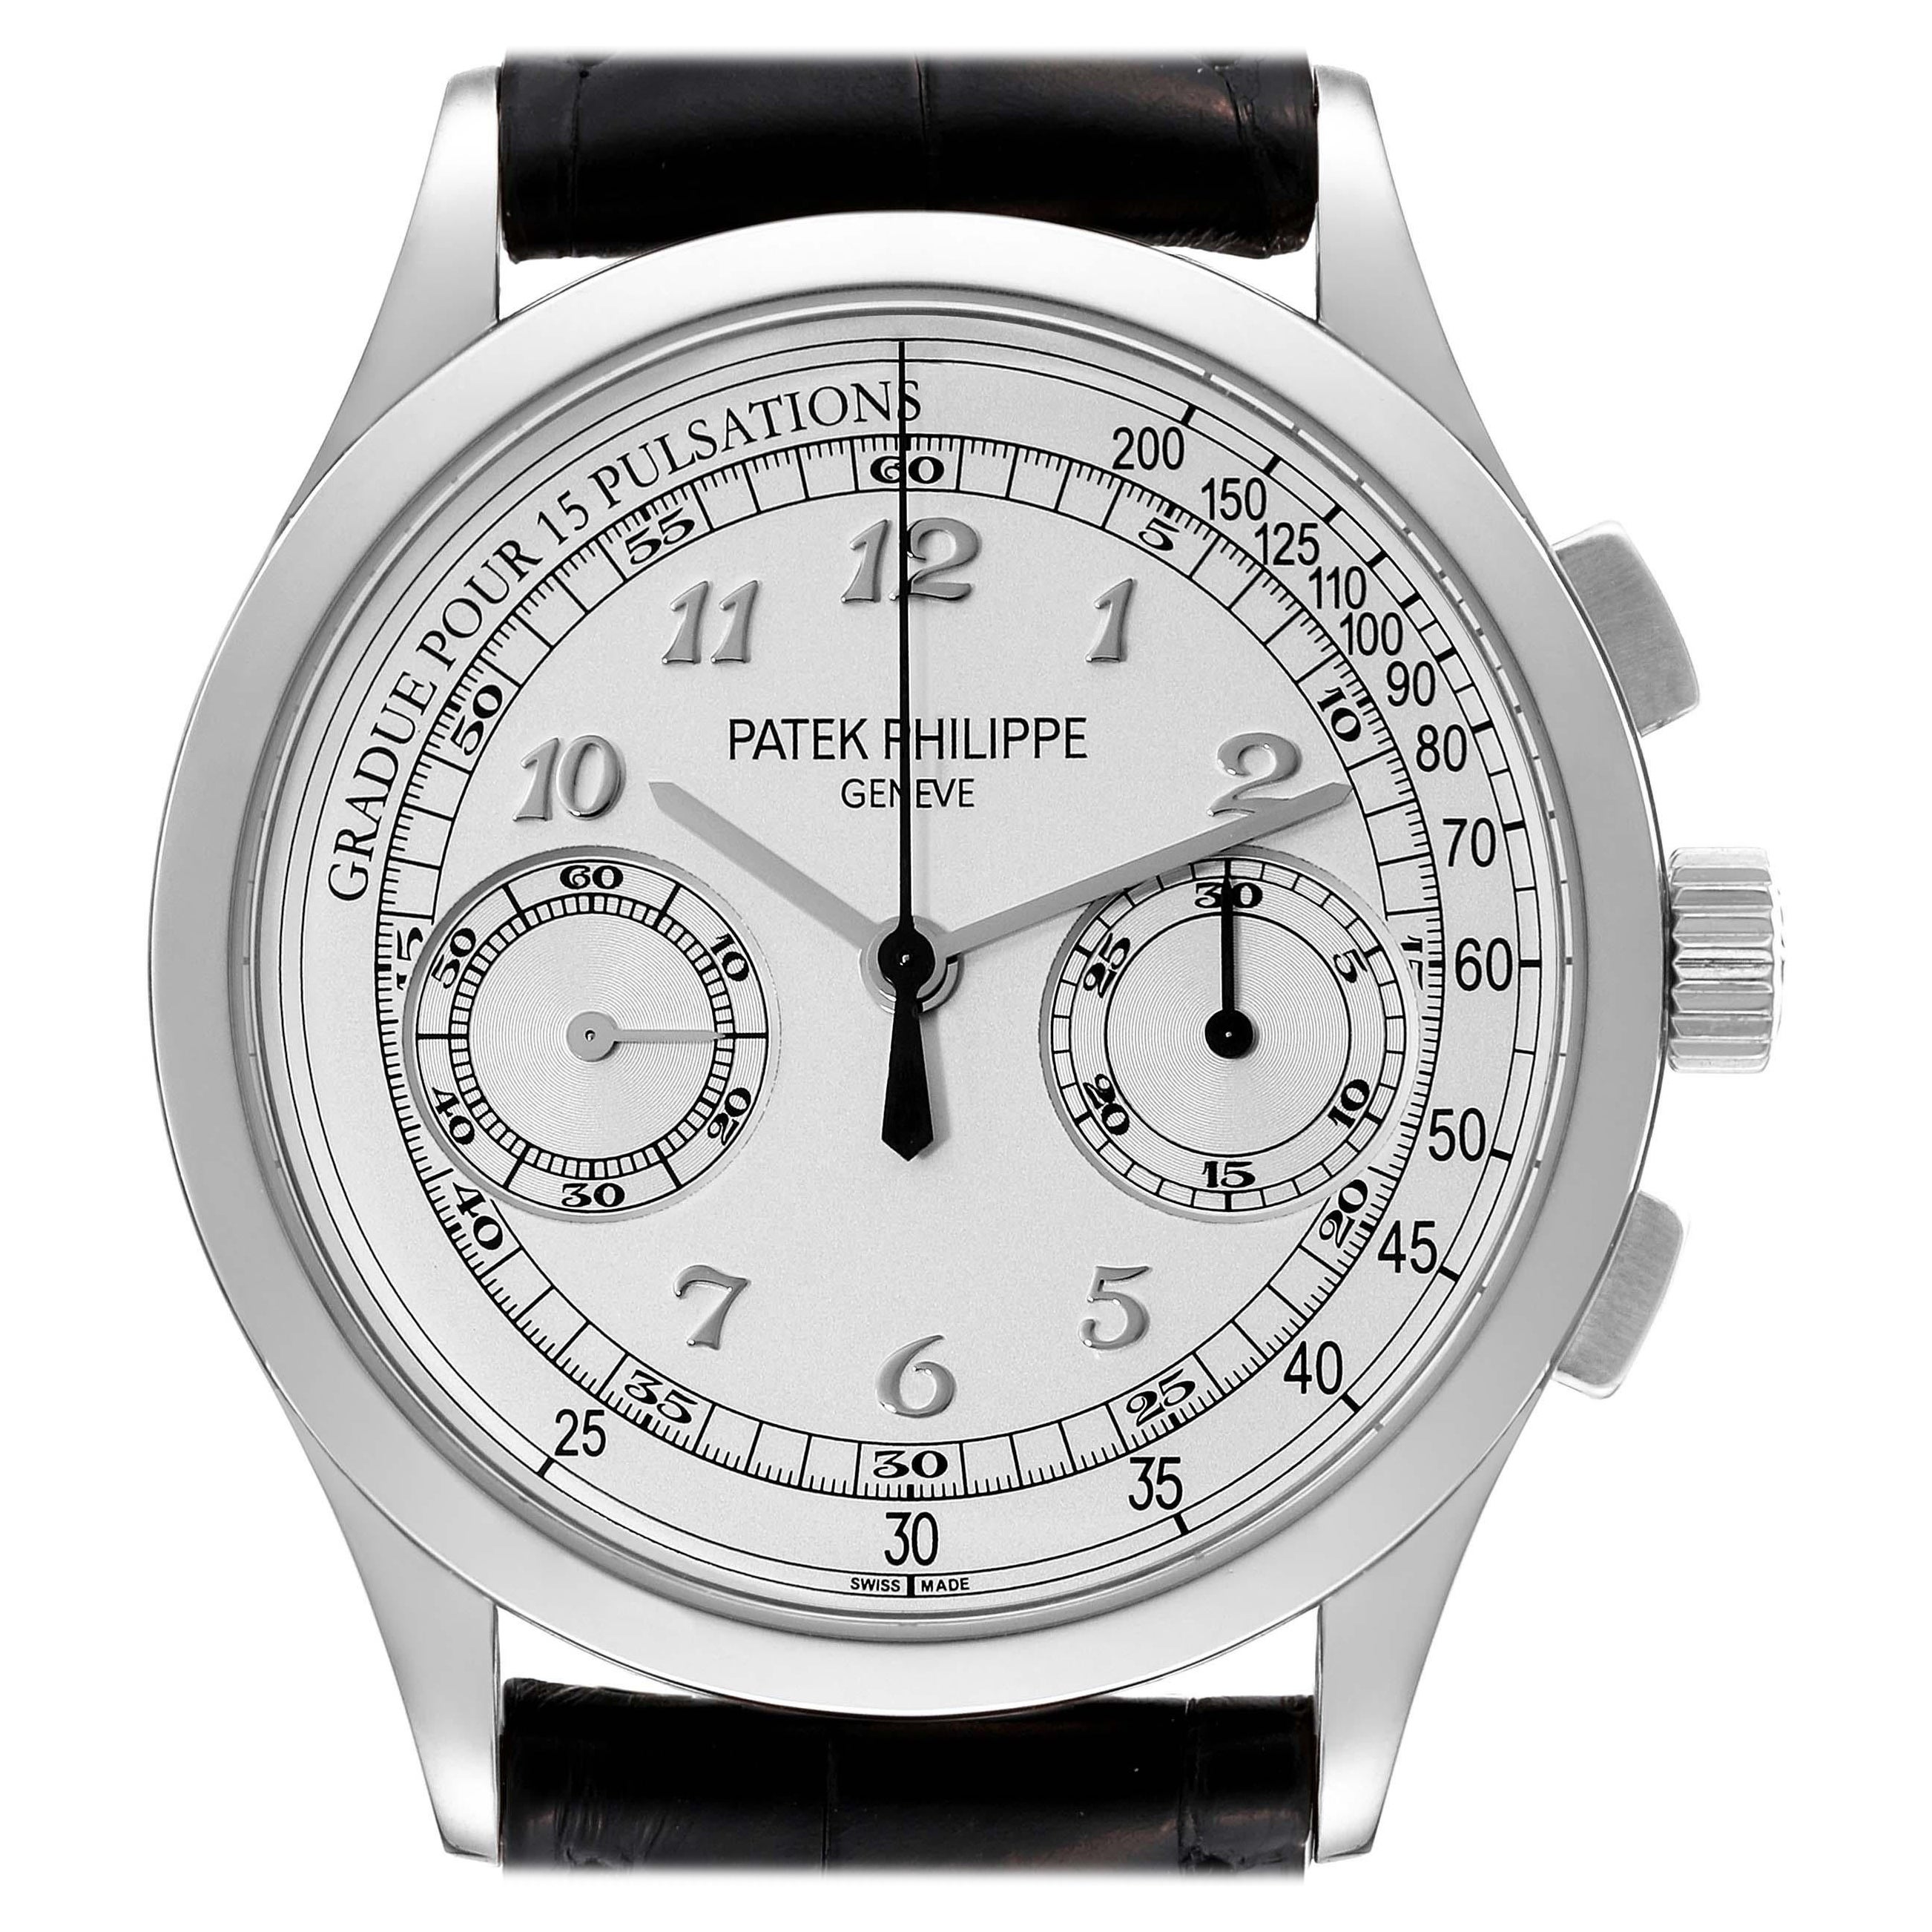 Patek Philippe Complications Chronograph White Gold Mens Watch 5170